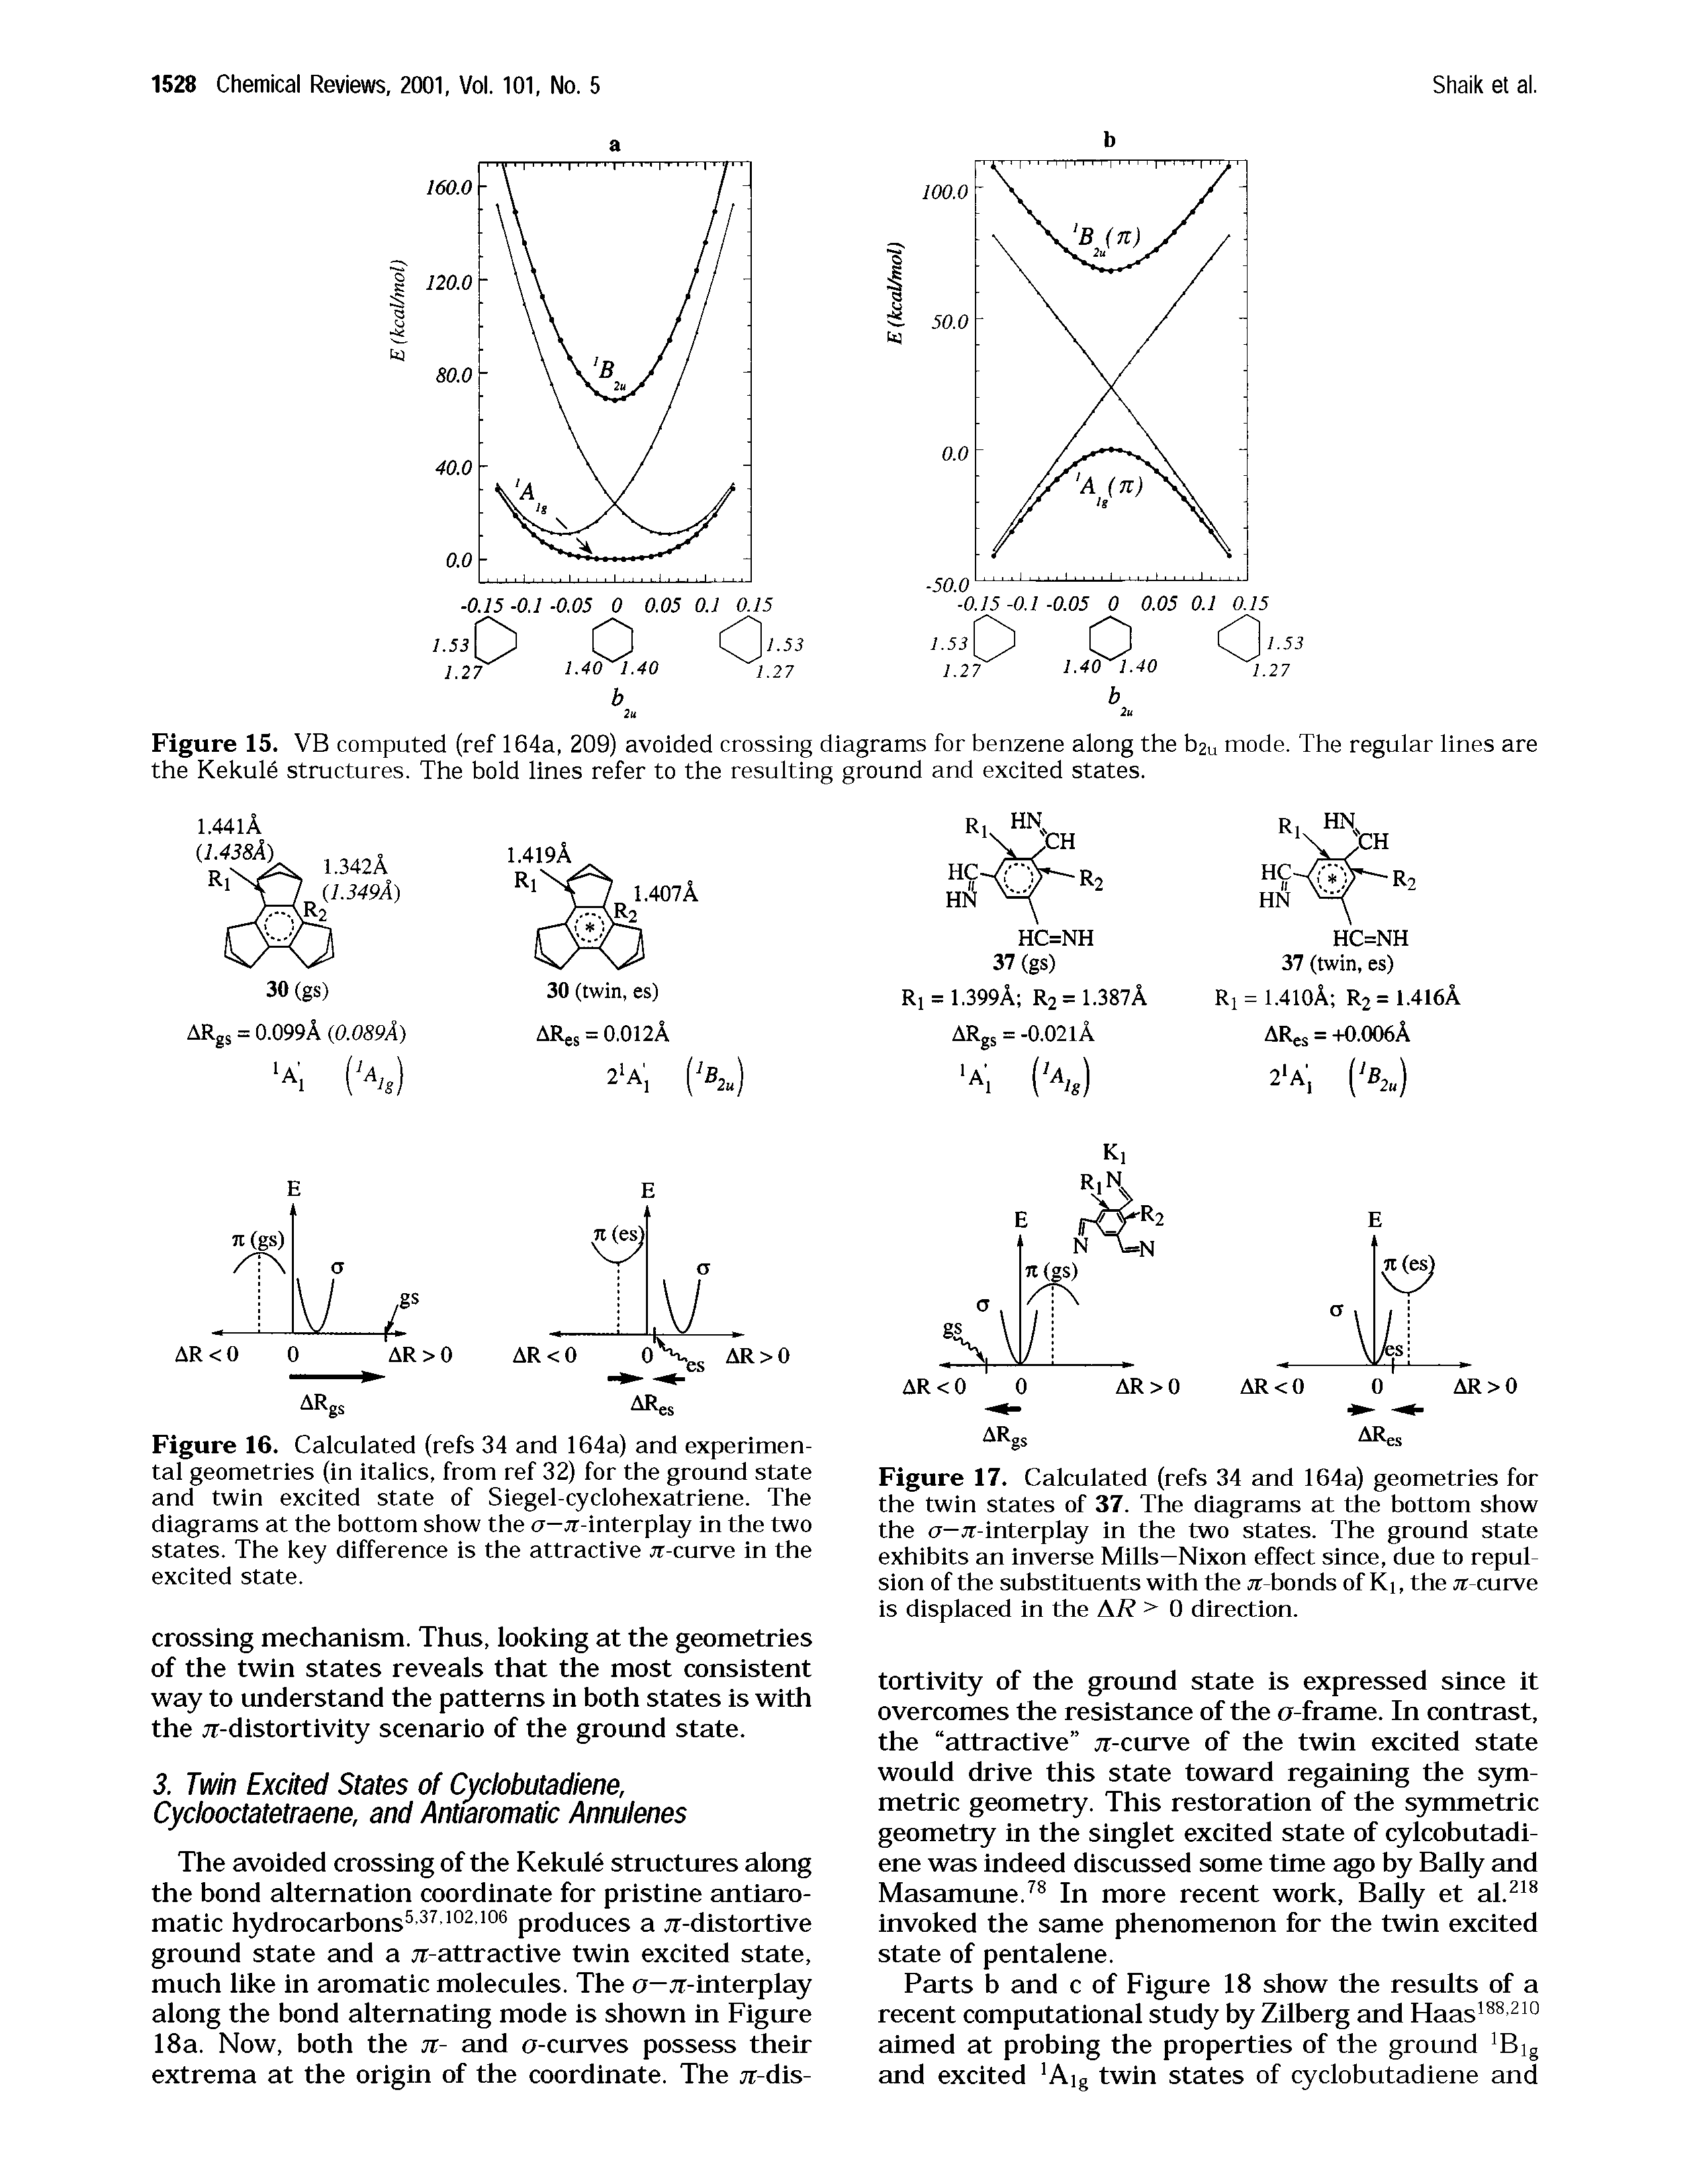 Figure 17. Calculated (refs 34 and 164a) geometries for the twin states of 37. The diagrams at the bottom show the o jt-interplay in the two states. The ground state exhibits an inverse Mills—Nixon effect since, due to repulsion of the substituents with the jt. bonds of Ki, the jt. curve is displaced in the AR > 0 direction.